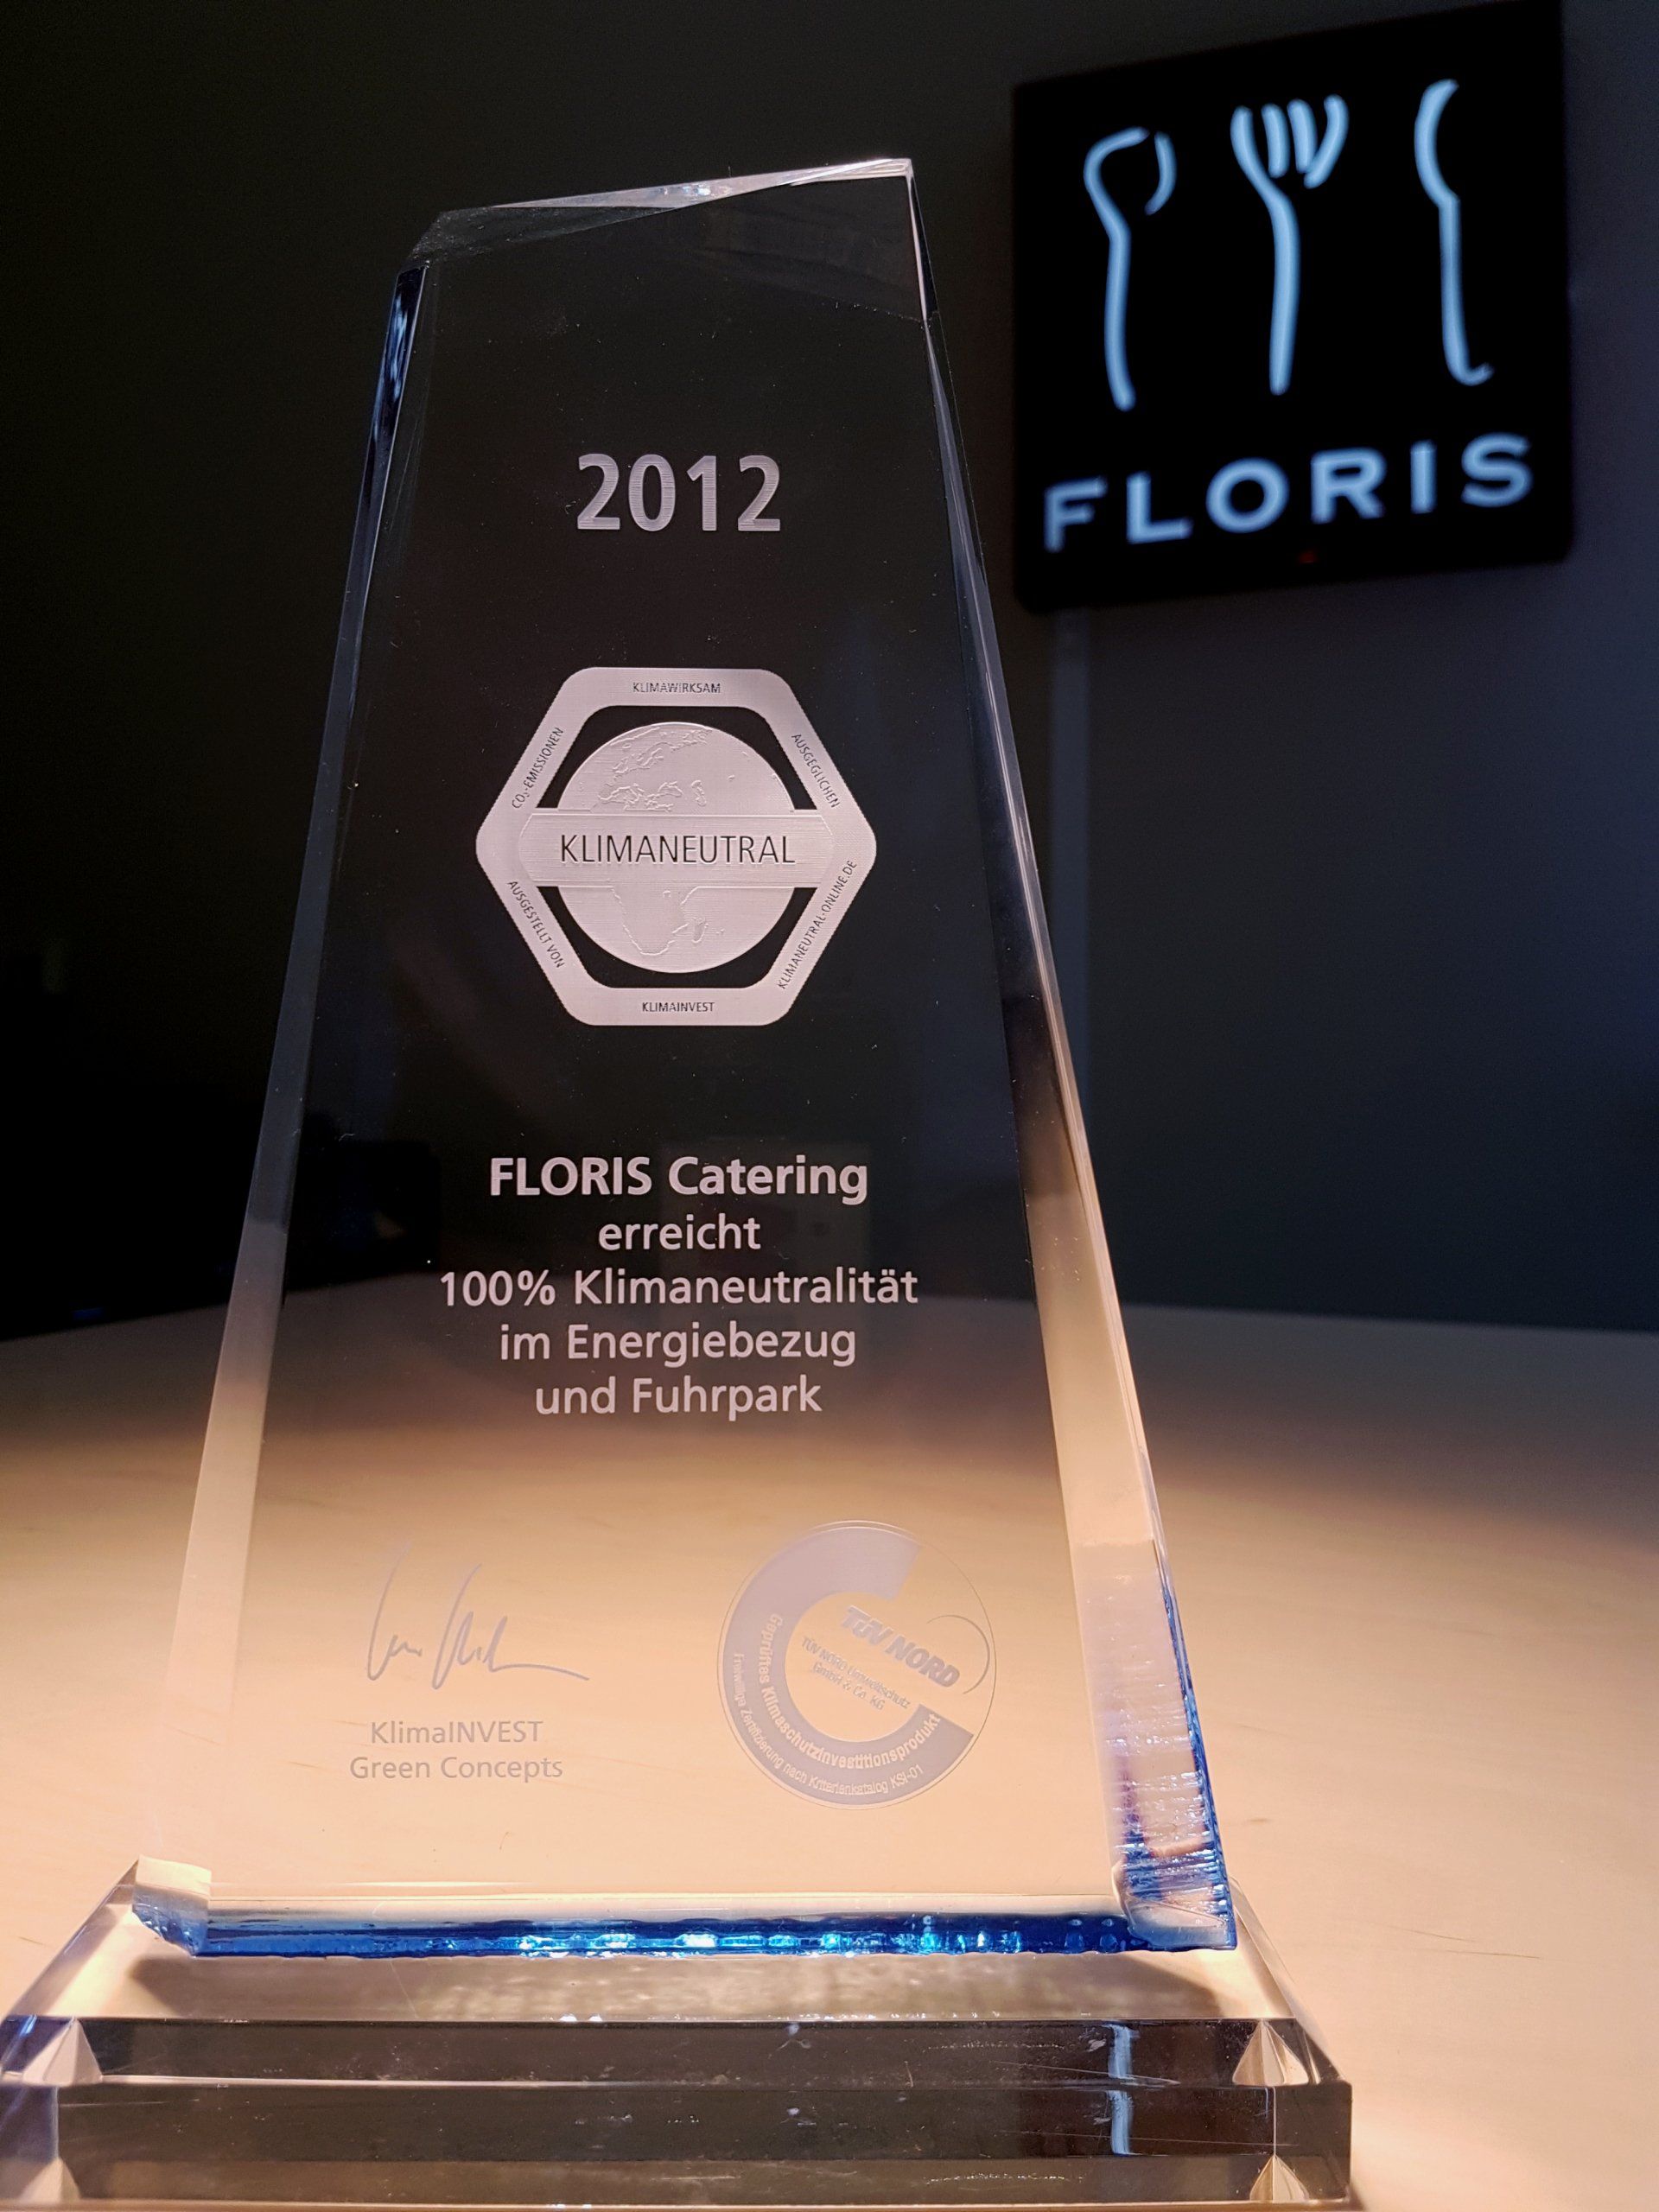 FLORIS Catering climate crystal